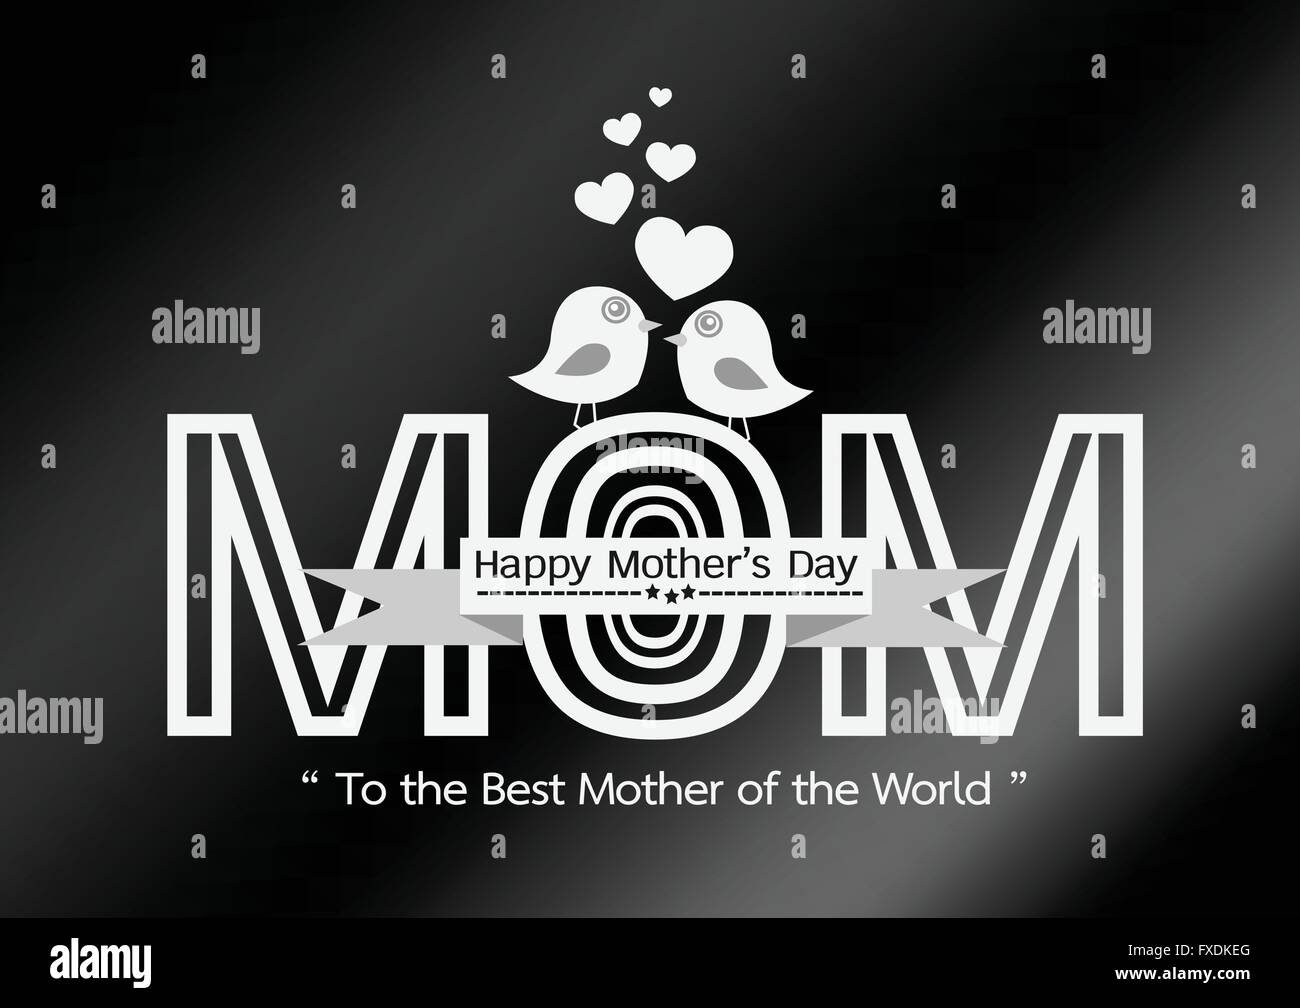 https://c8.alamy.com/comp/FXDKEG/happy-mothers-day-greeting-card-design-for-your-mom-FXDKEG.jpg